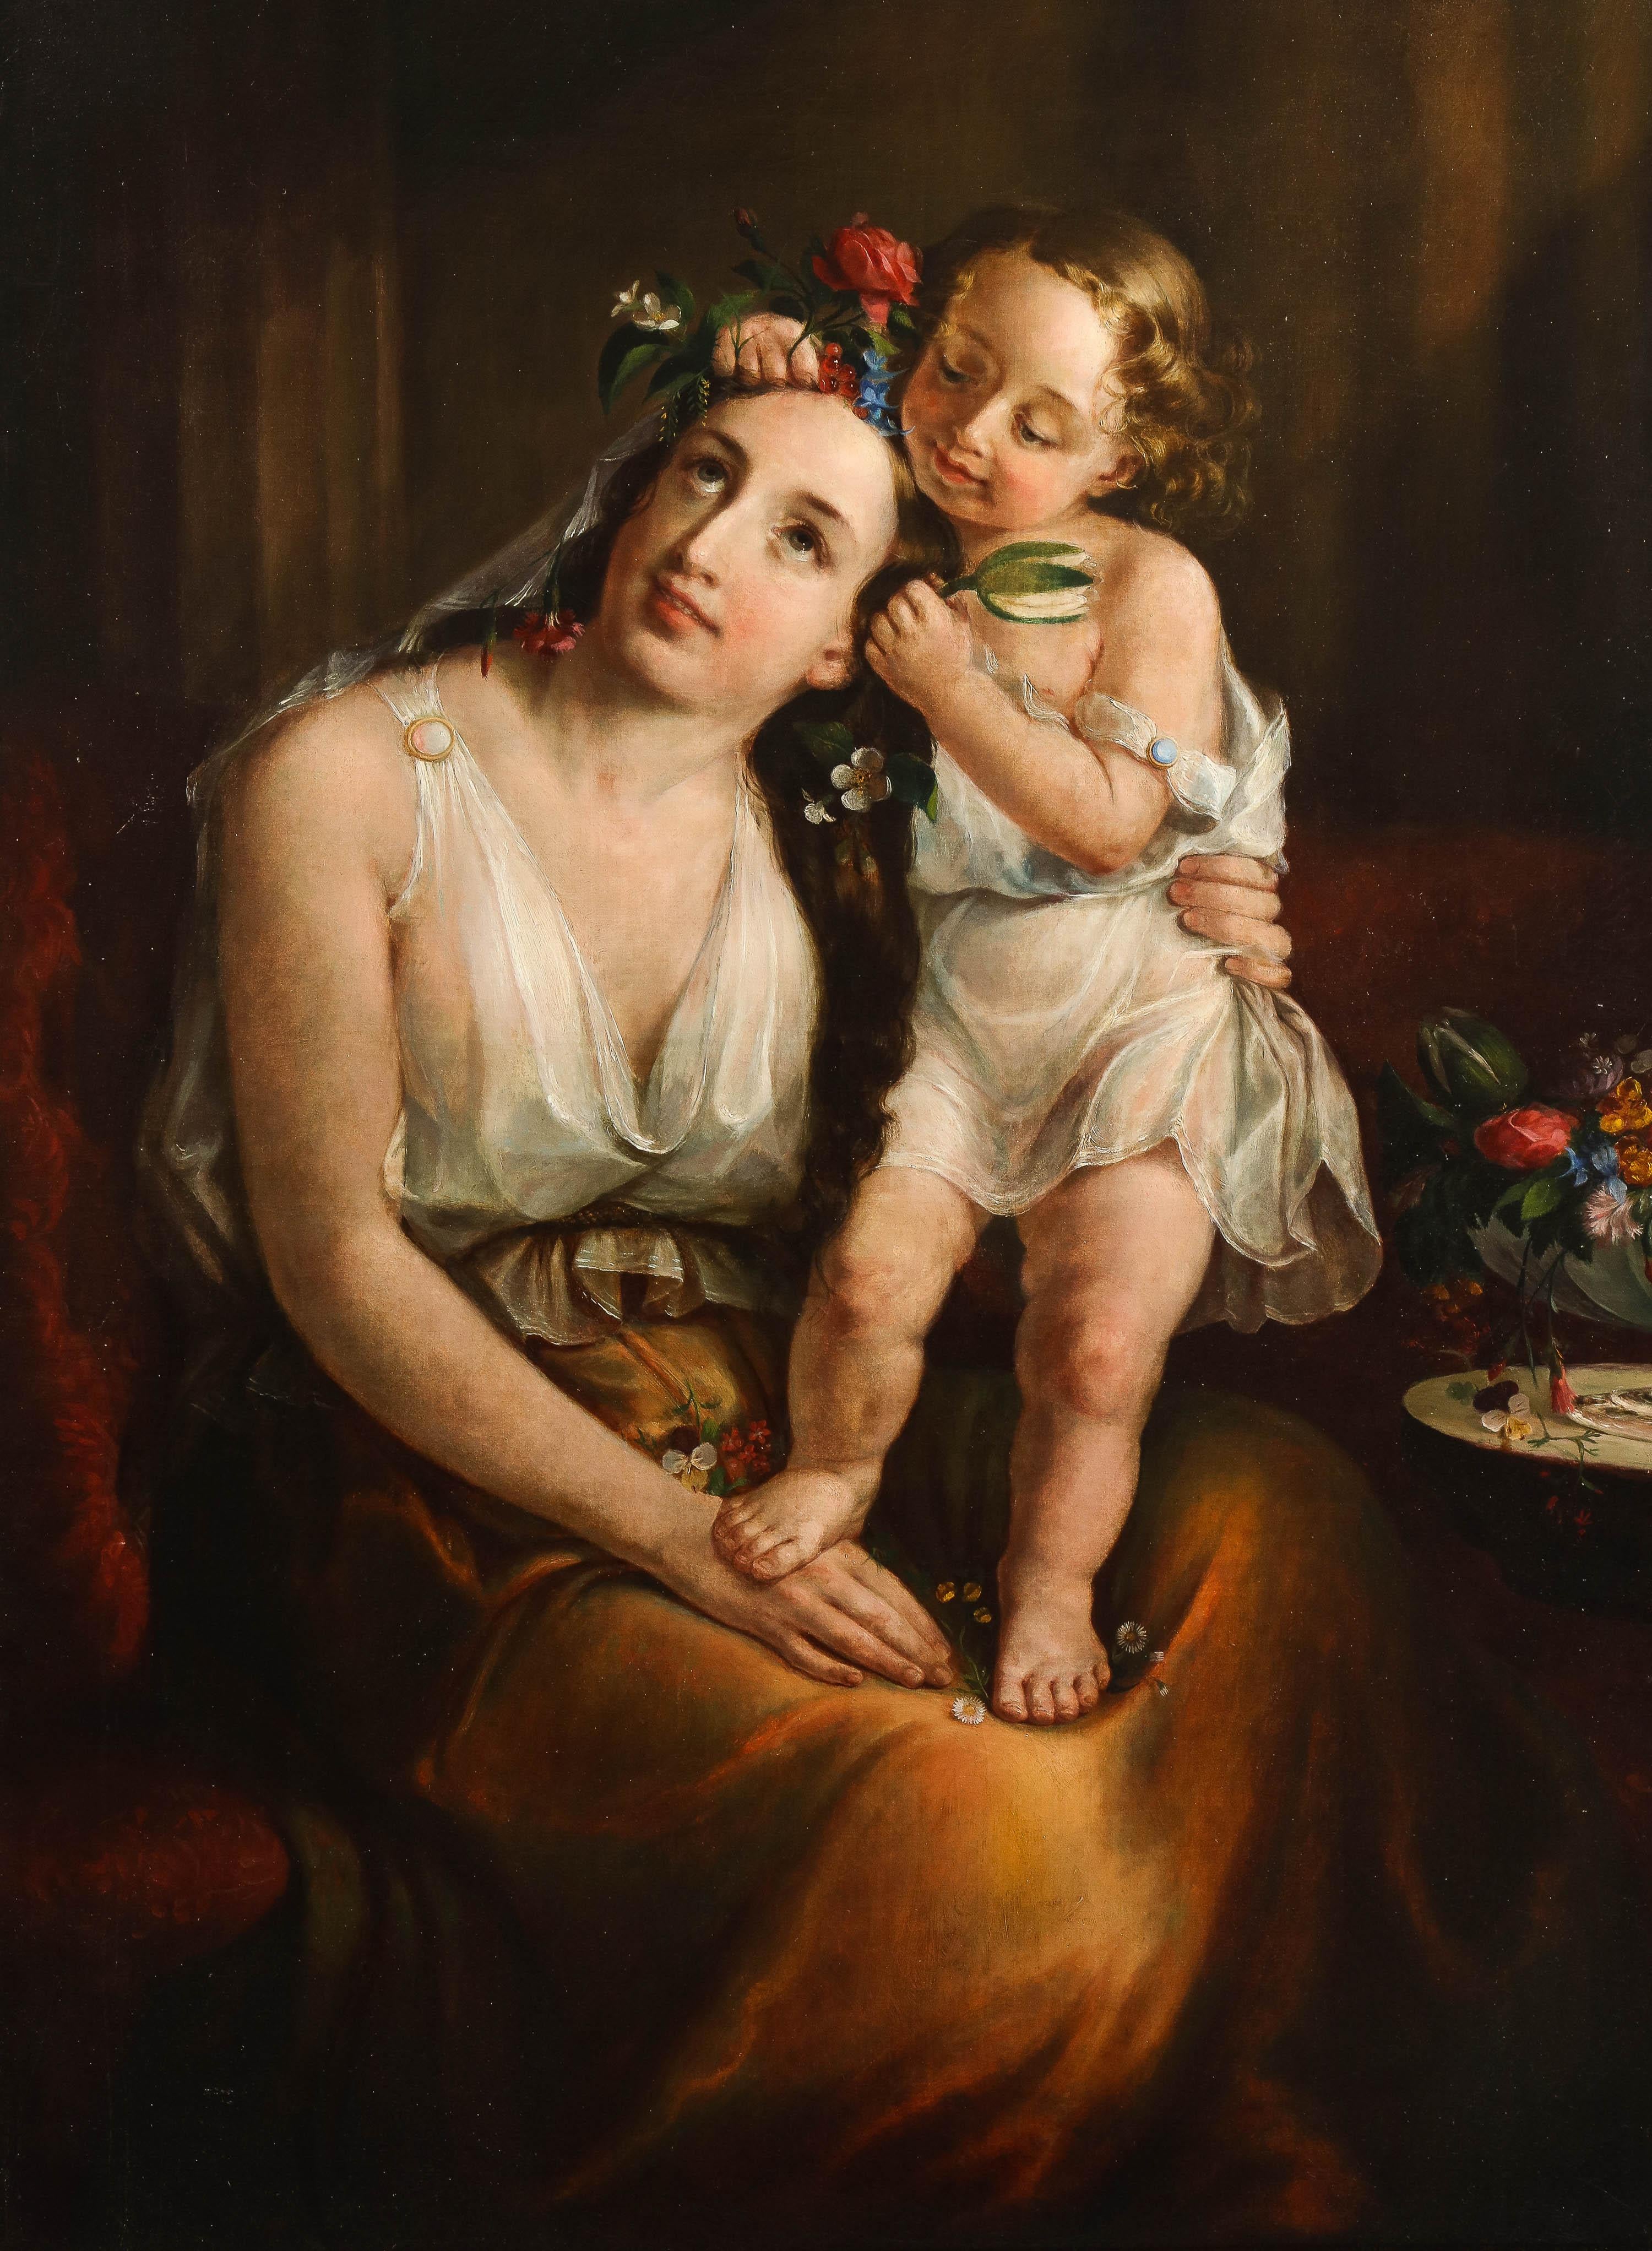 Lilly Martin Spencer (American, 1822-1902) A Portrait of a Mother and Child

19th Century.

Oil on canvas, signed

Lilly Martin Spencer was one of the most popular and American female genre painters in the mid-nineteenth century. She primarily